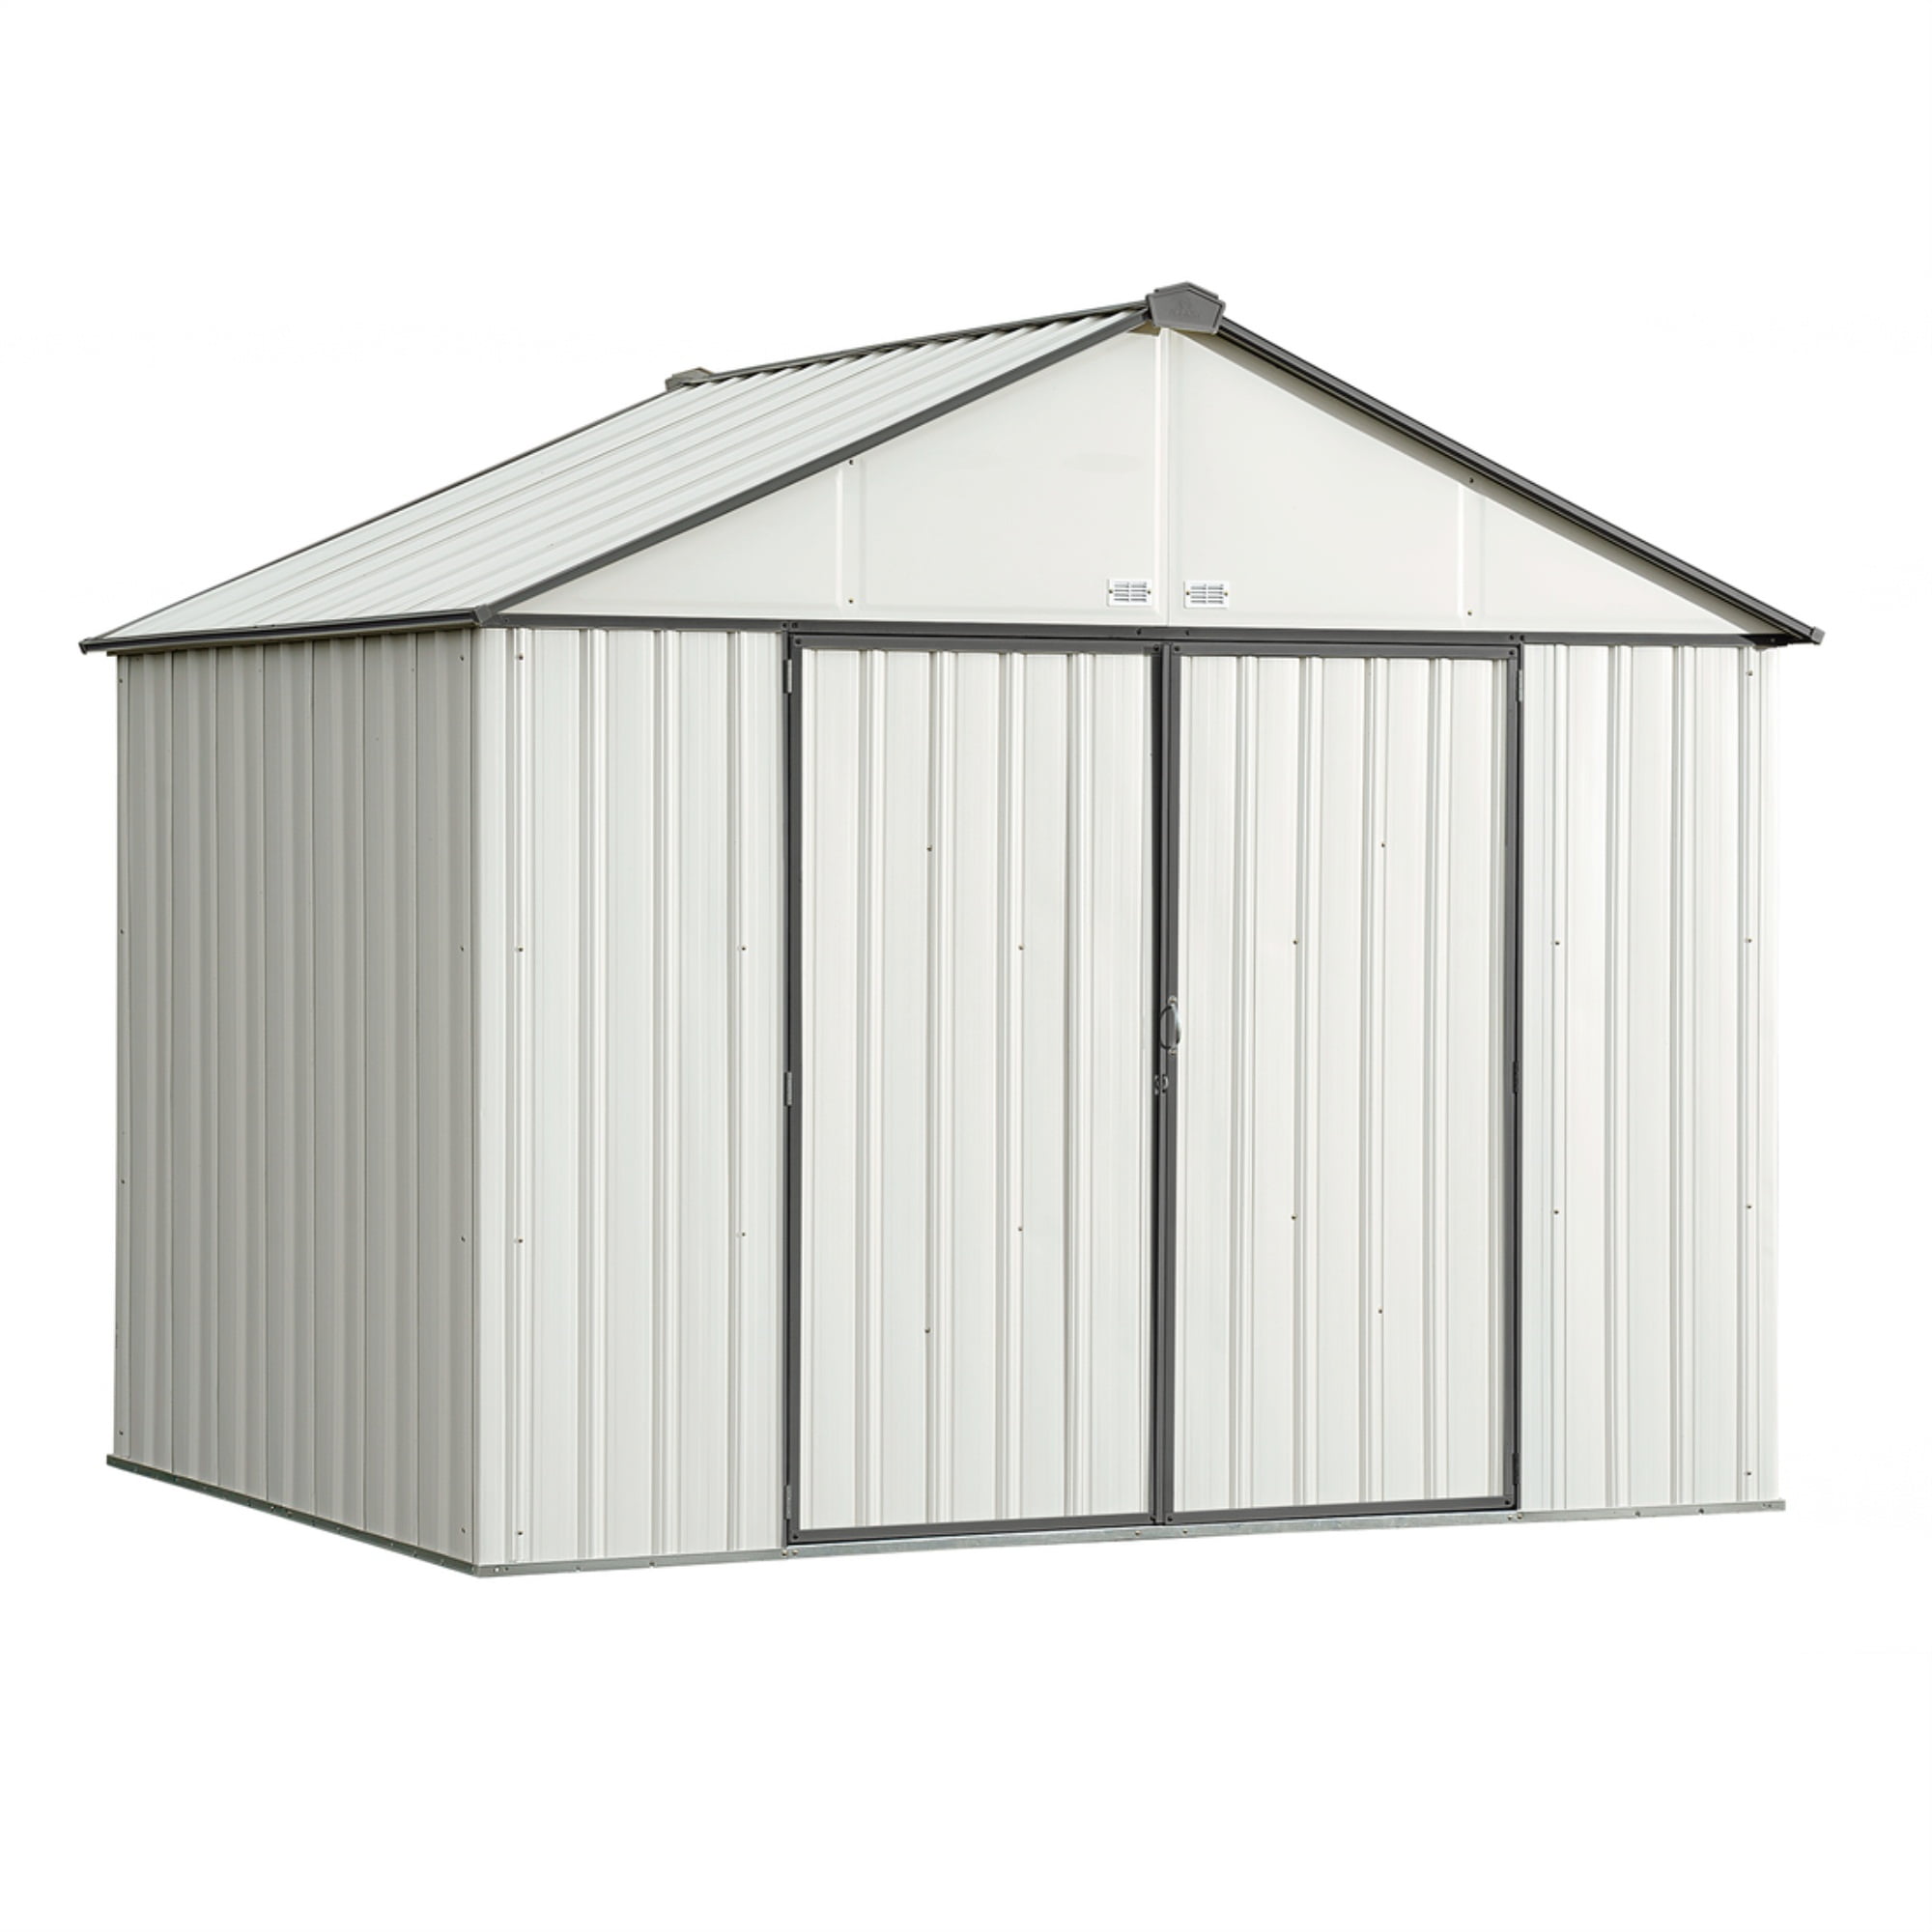 Ez 10X8, Extra High Gable, 72 In Walls, Vents, Cream & Charcoal